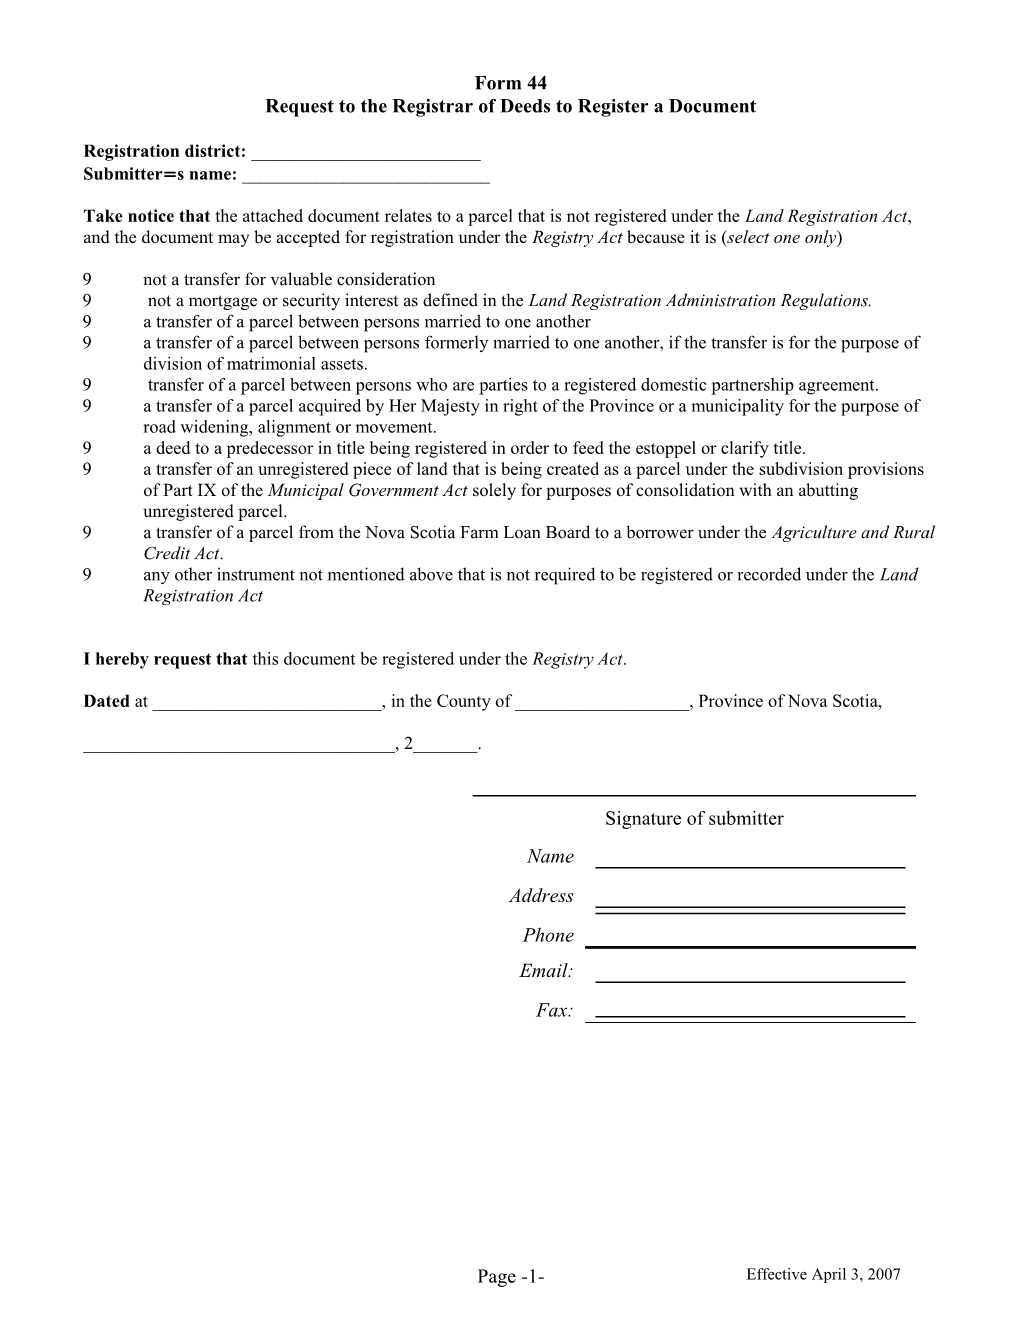 Request to the Registrar of Deeds to Register a Document